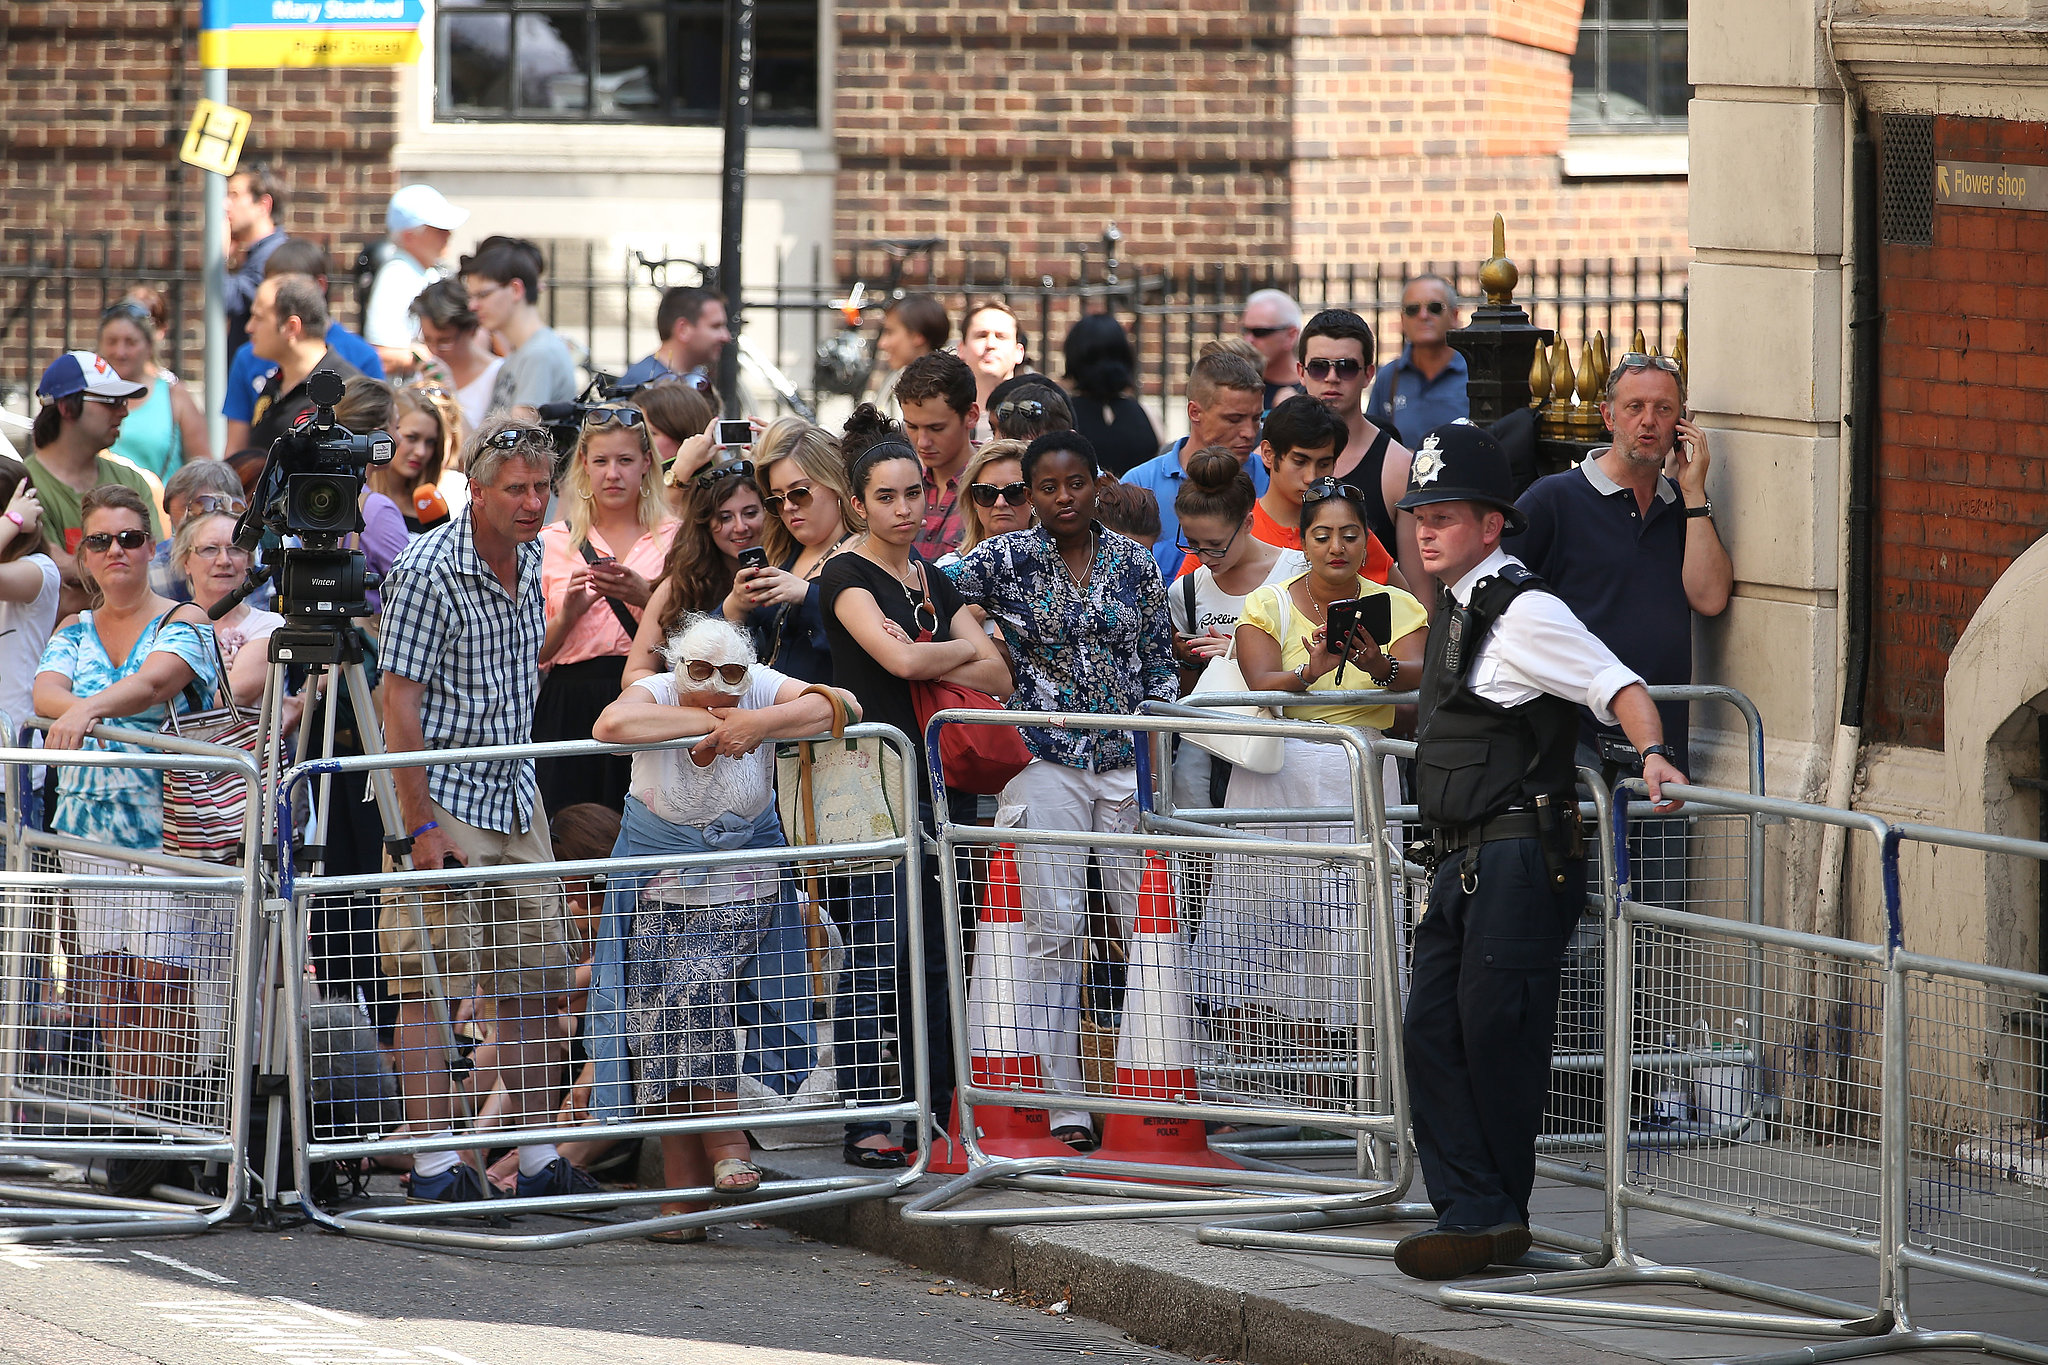 police-officer-controlled-crowds-royal-fans-who-waiting